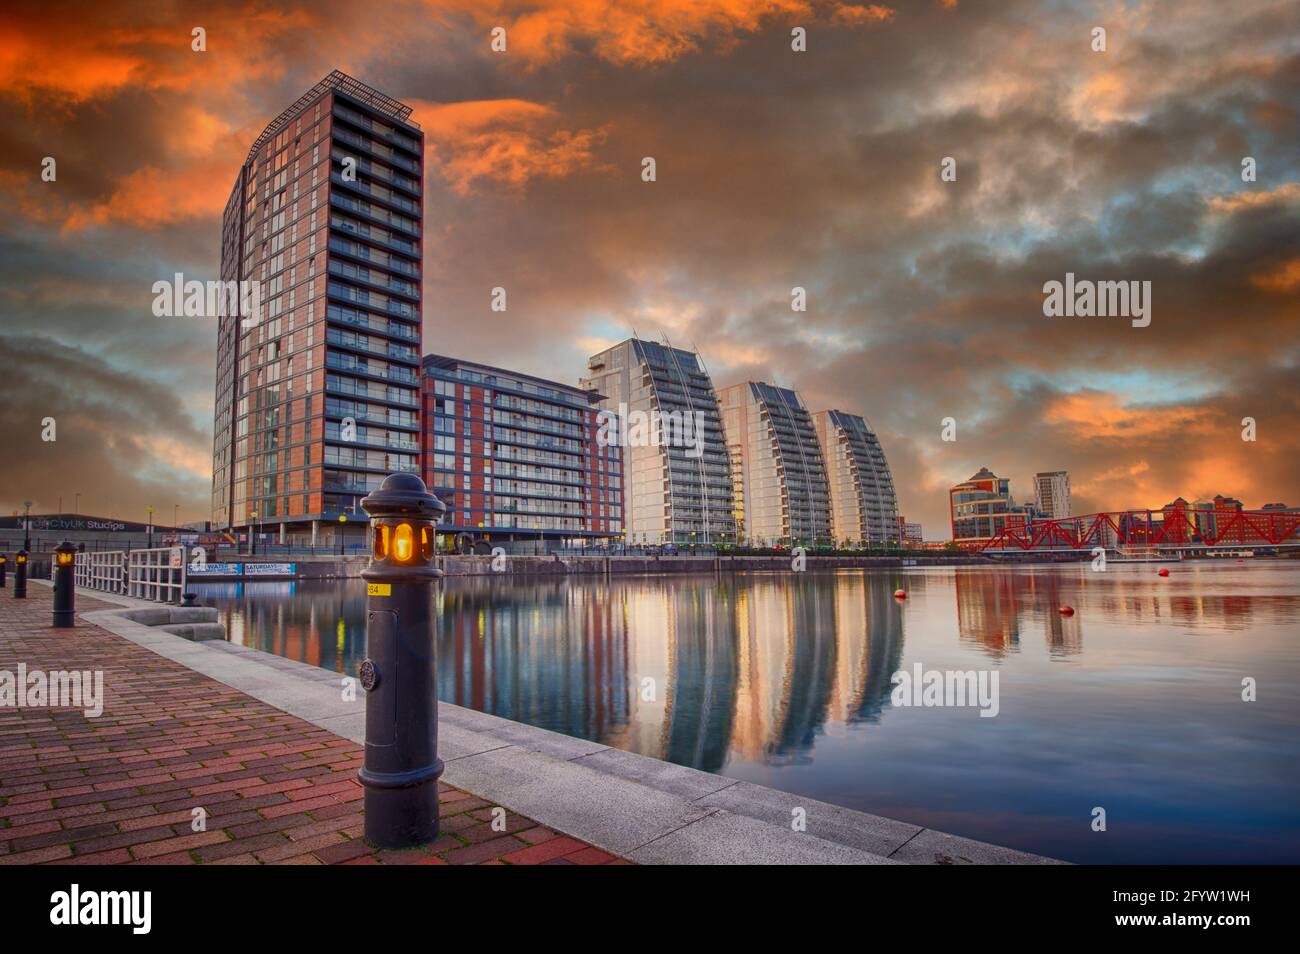 The sun setting over the NV Buildings and one of the docks at Salford Quays, Salford, Lancashire, UK Stock Photo